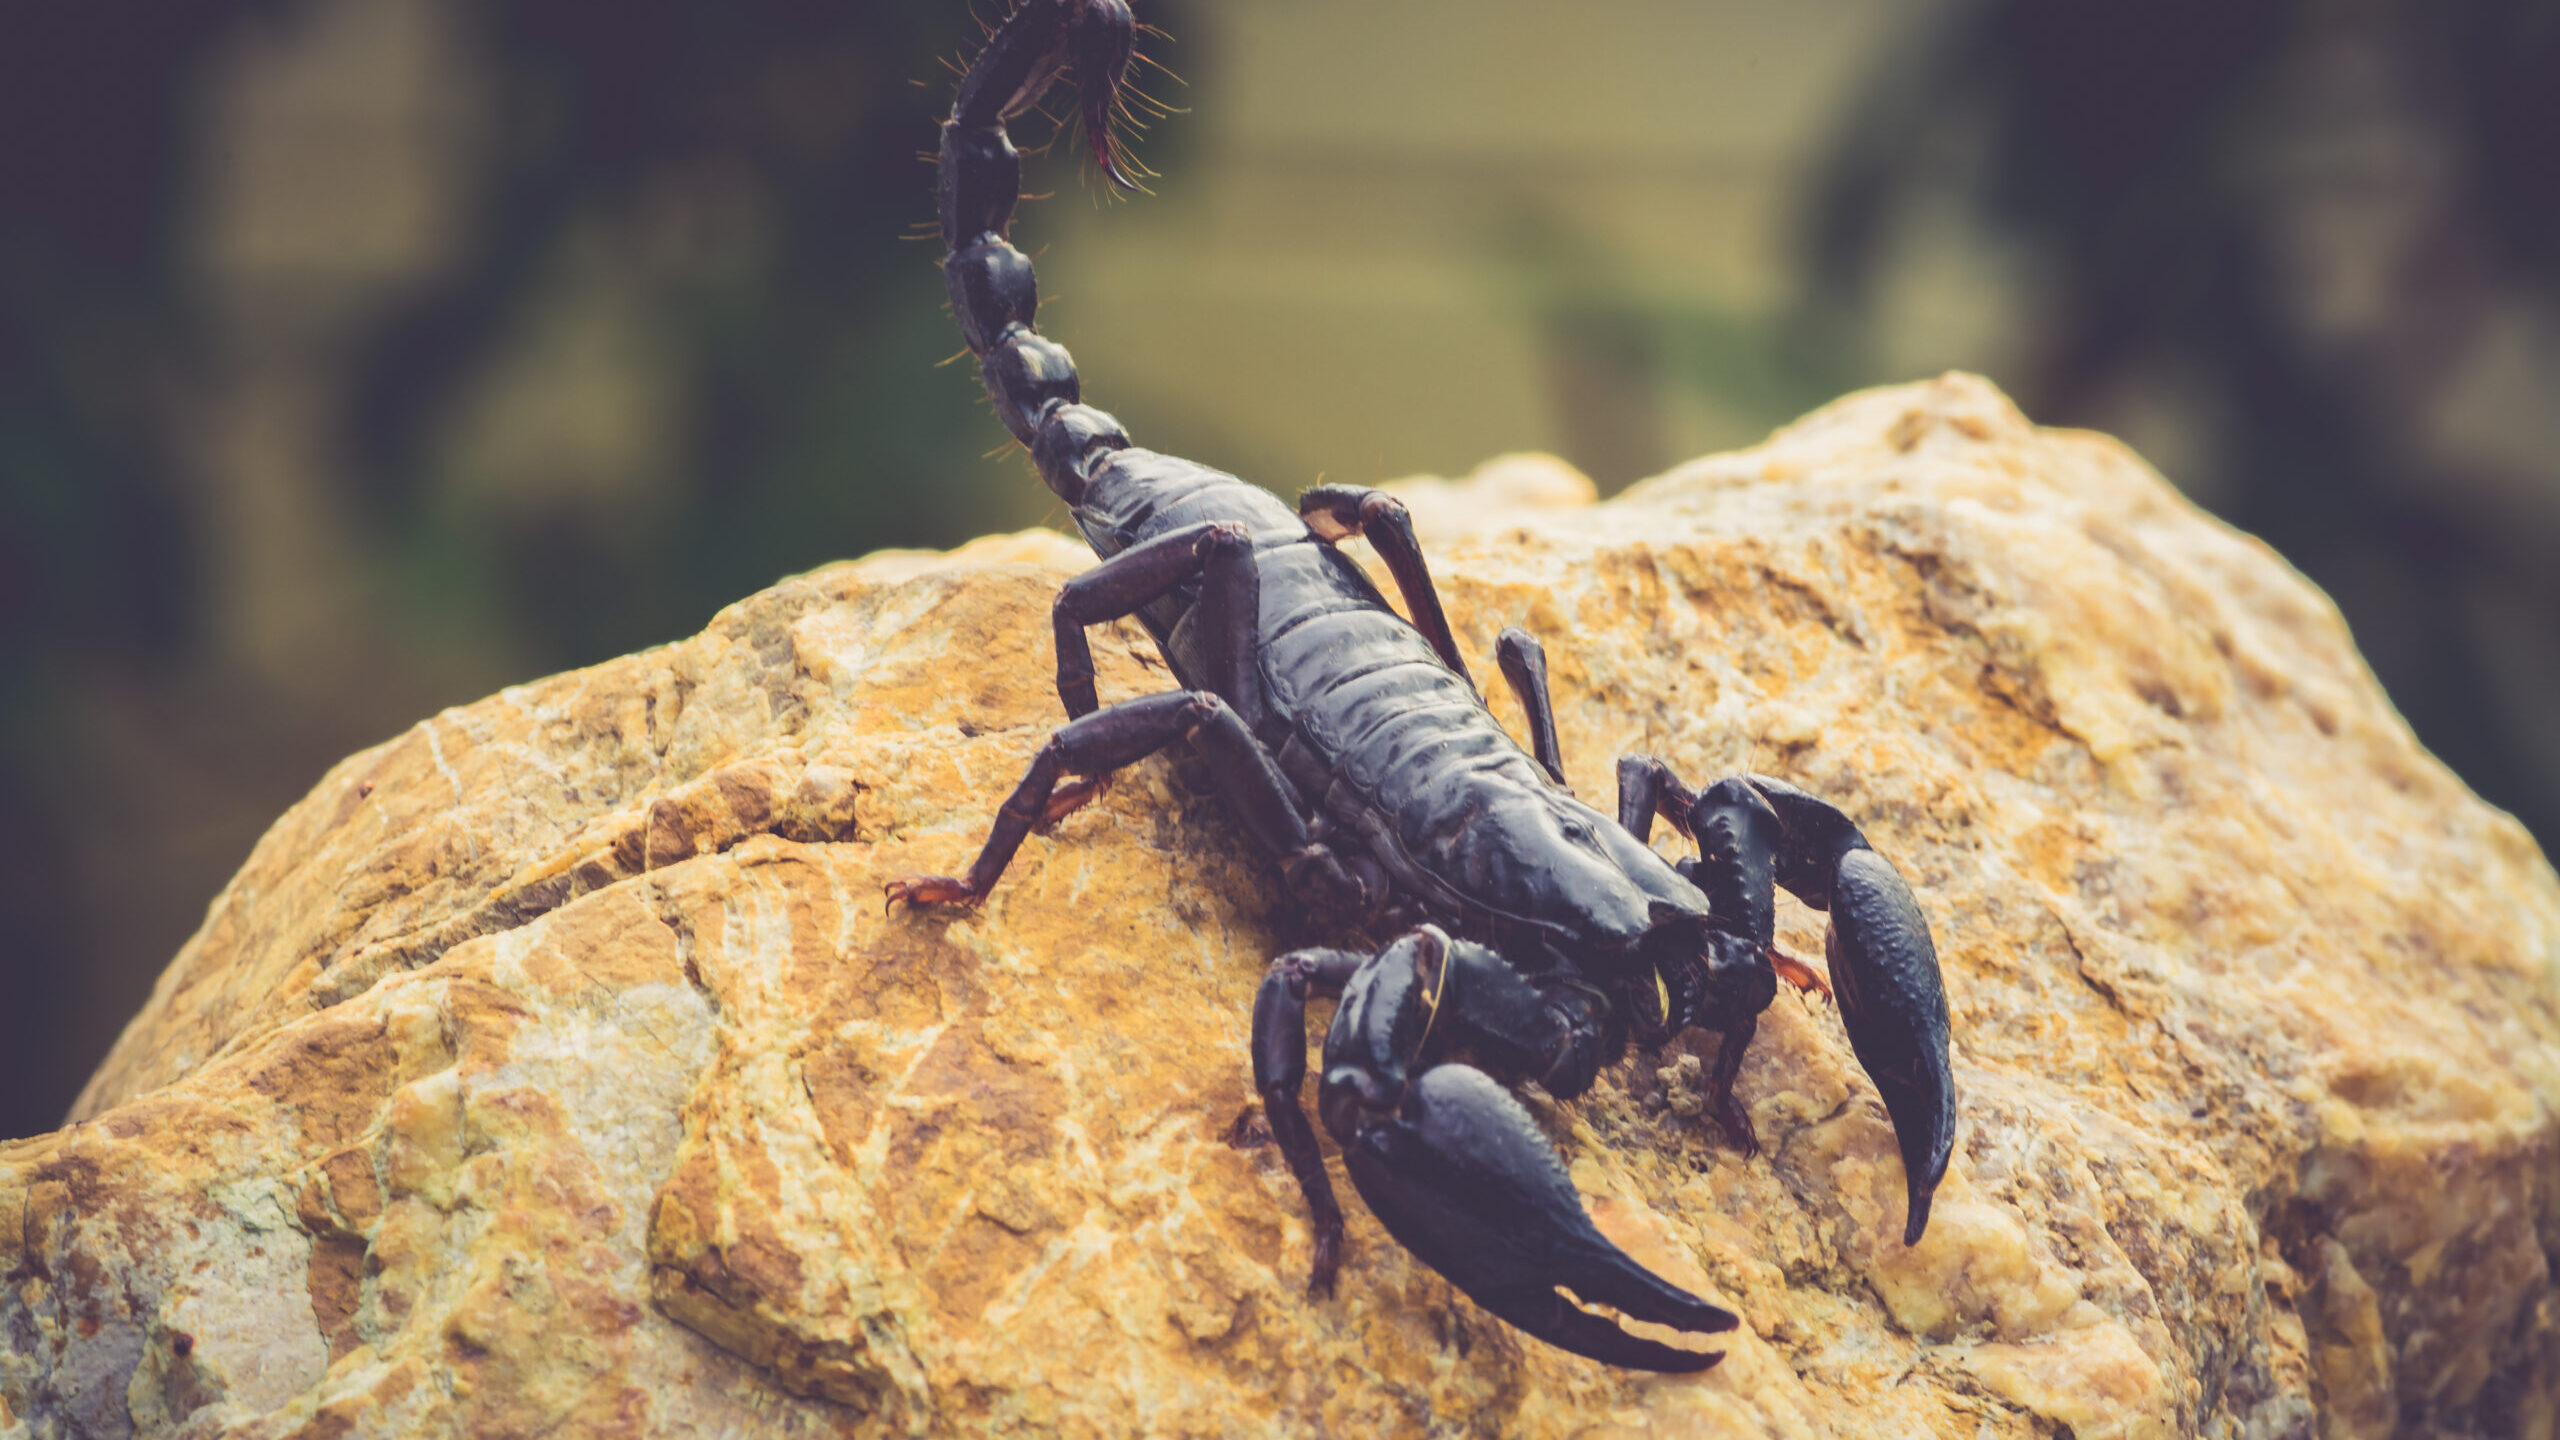 A black scorpion in nature wildlife live stone on big stone at f